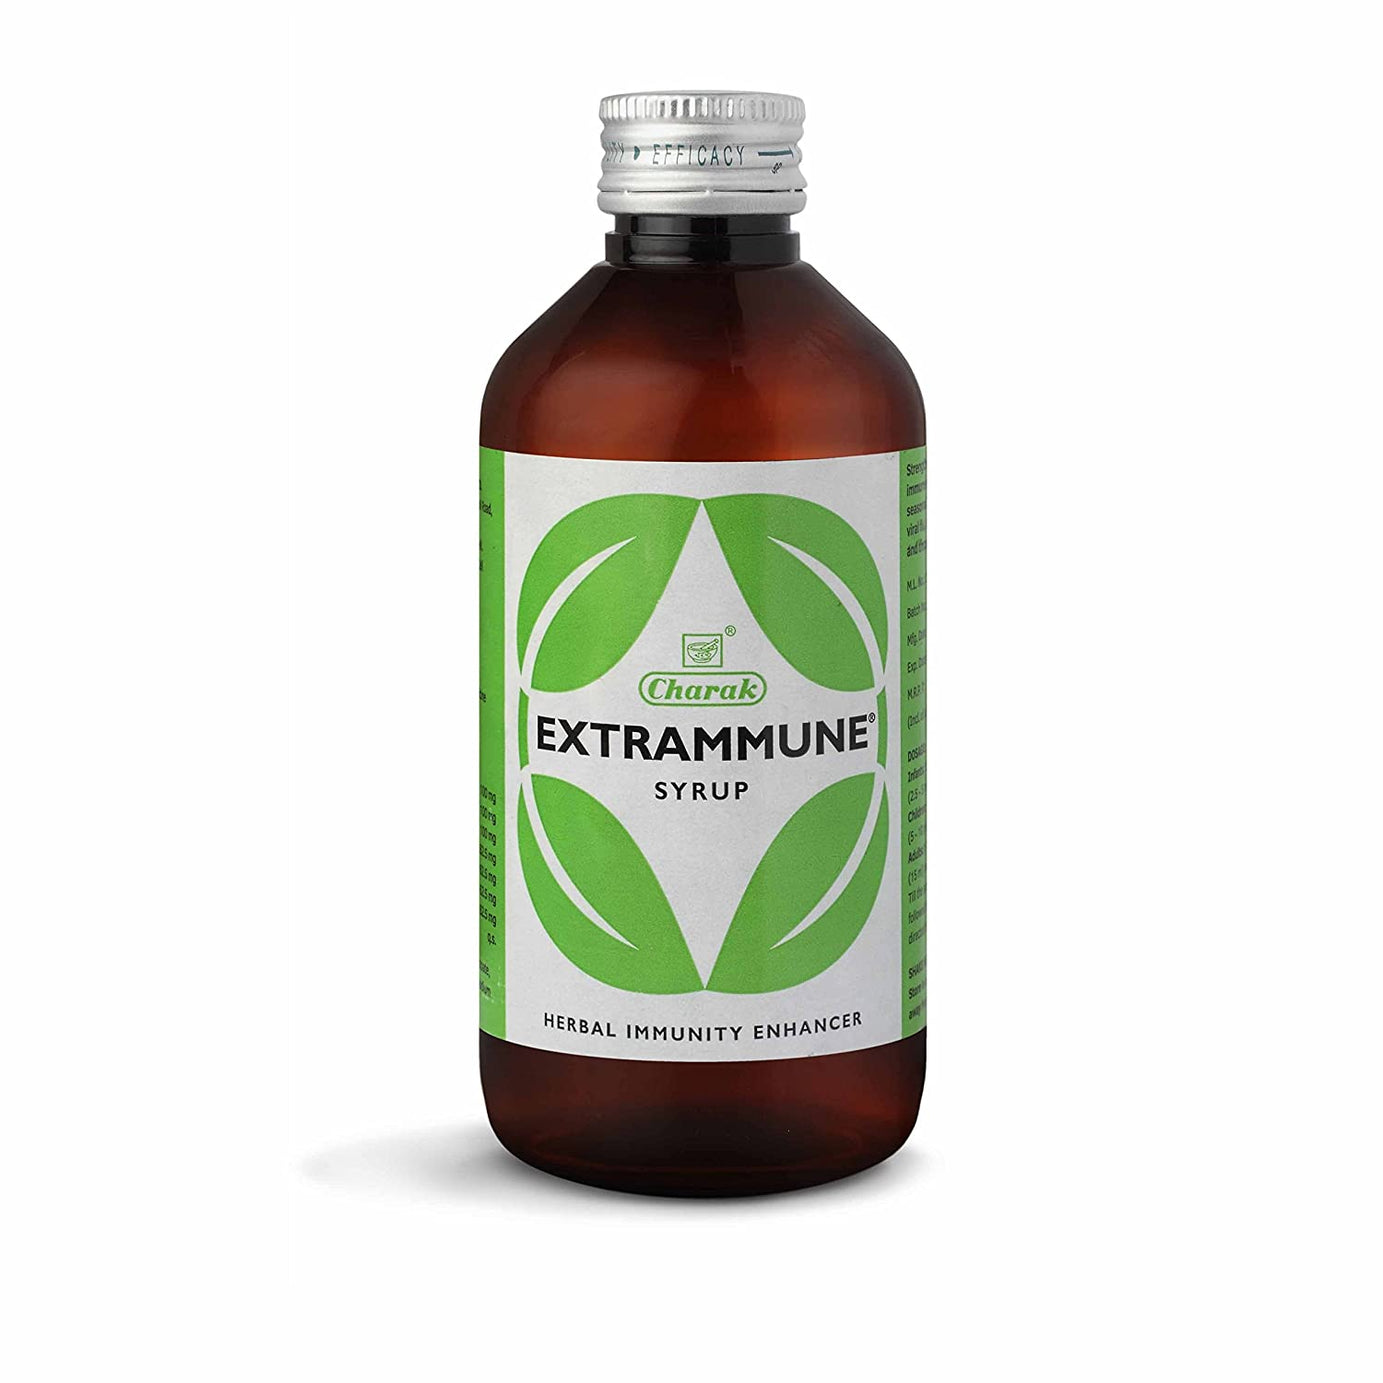 Shop Extrammune Syrup 200ml at price 115.00 from Charak Online - Ayush Care